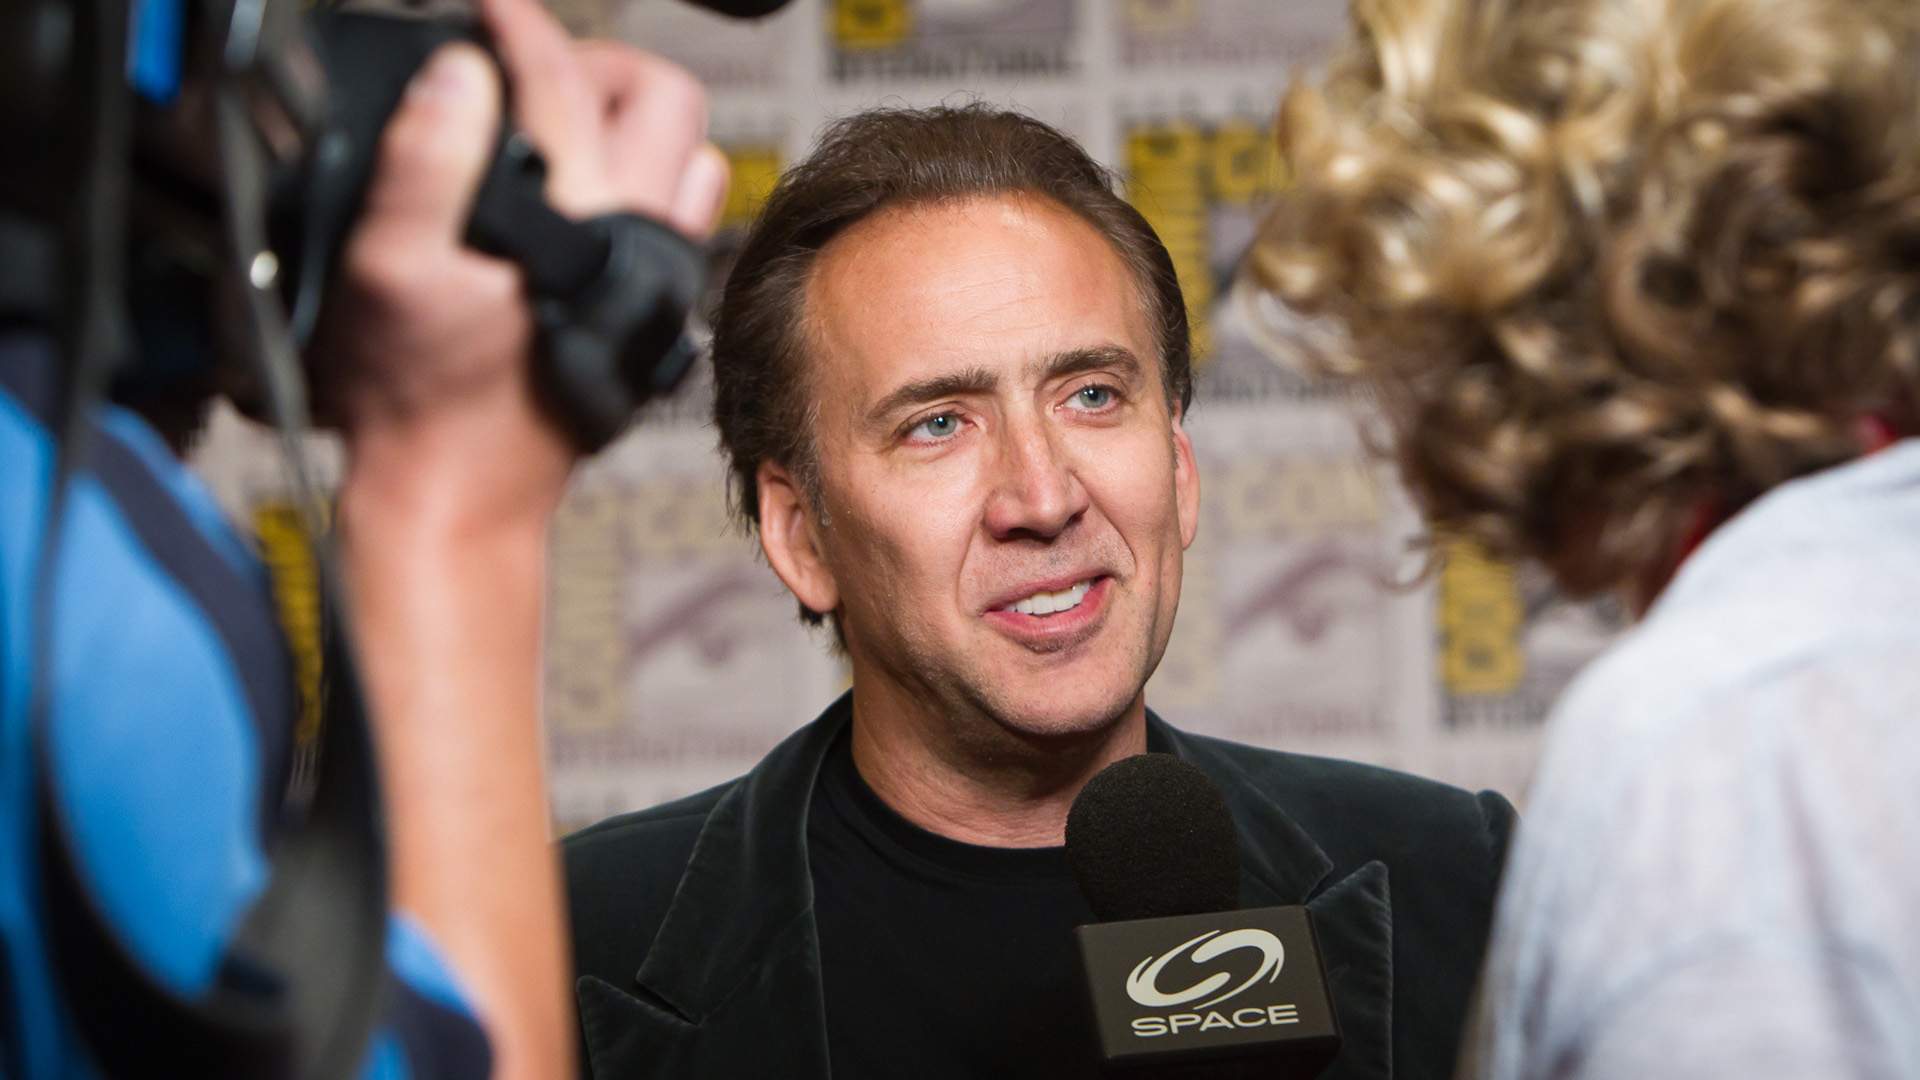 Nicolas Cage Looks Set to Play an Aussie Expat Returning Home for a Beach Battle in 'The Surfer'